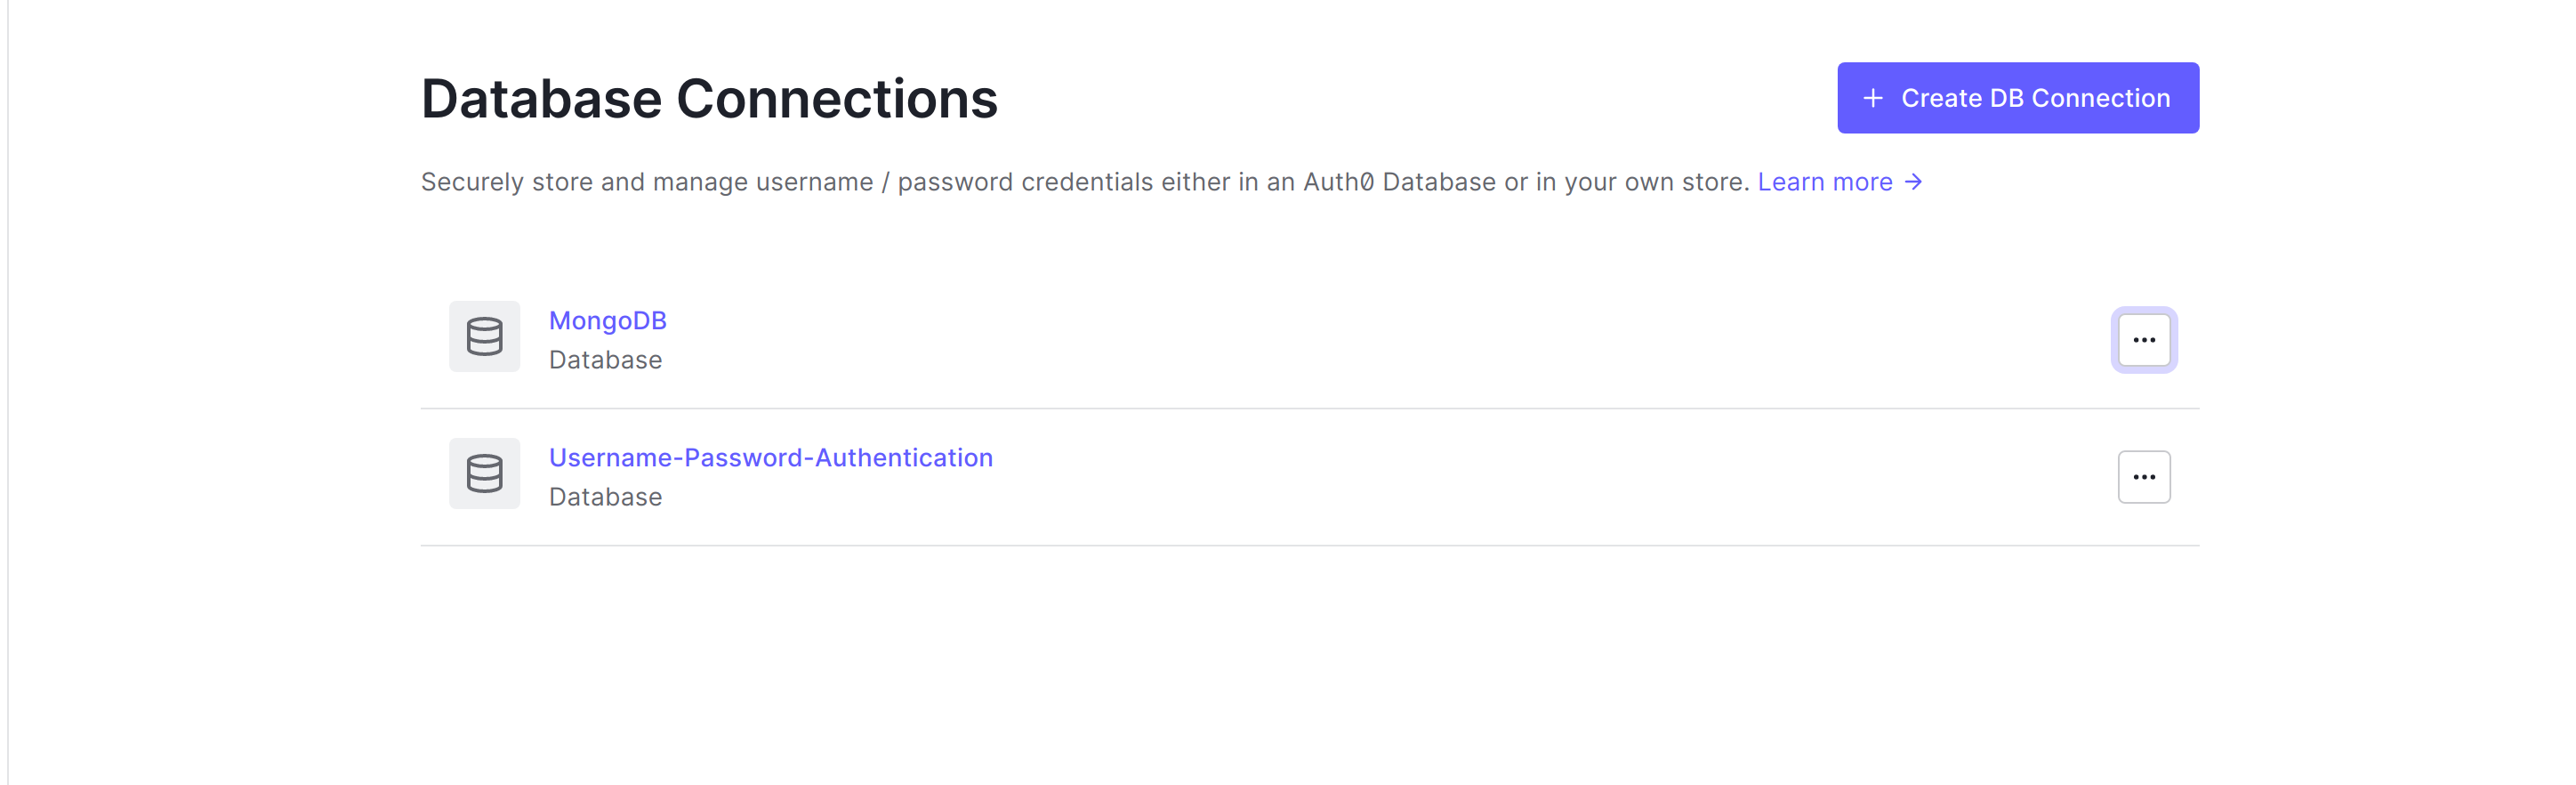 Database connections in Auth0